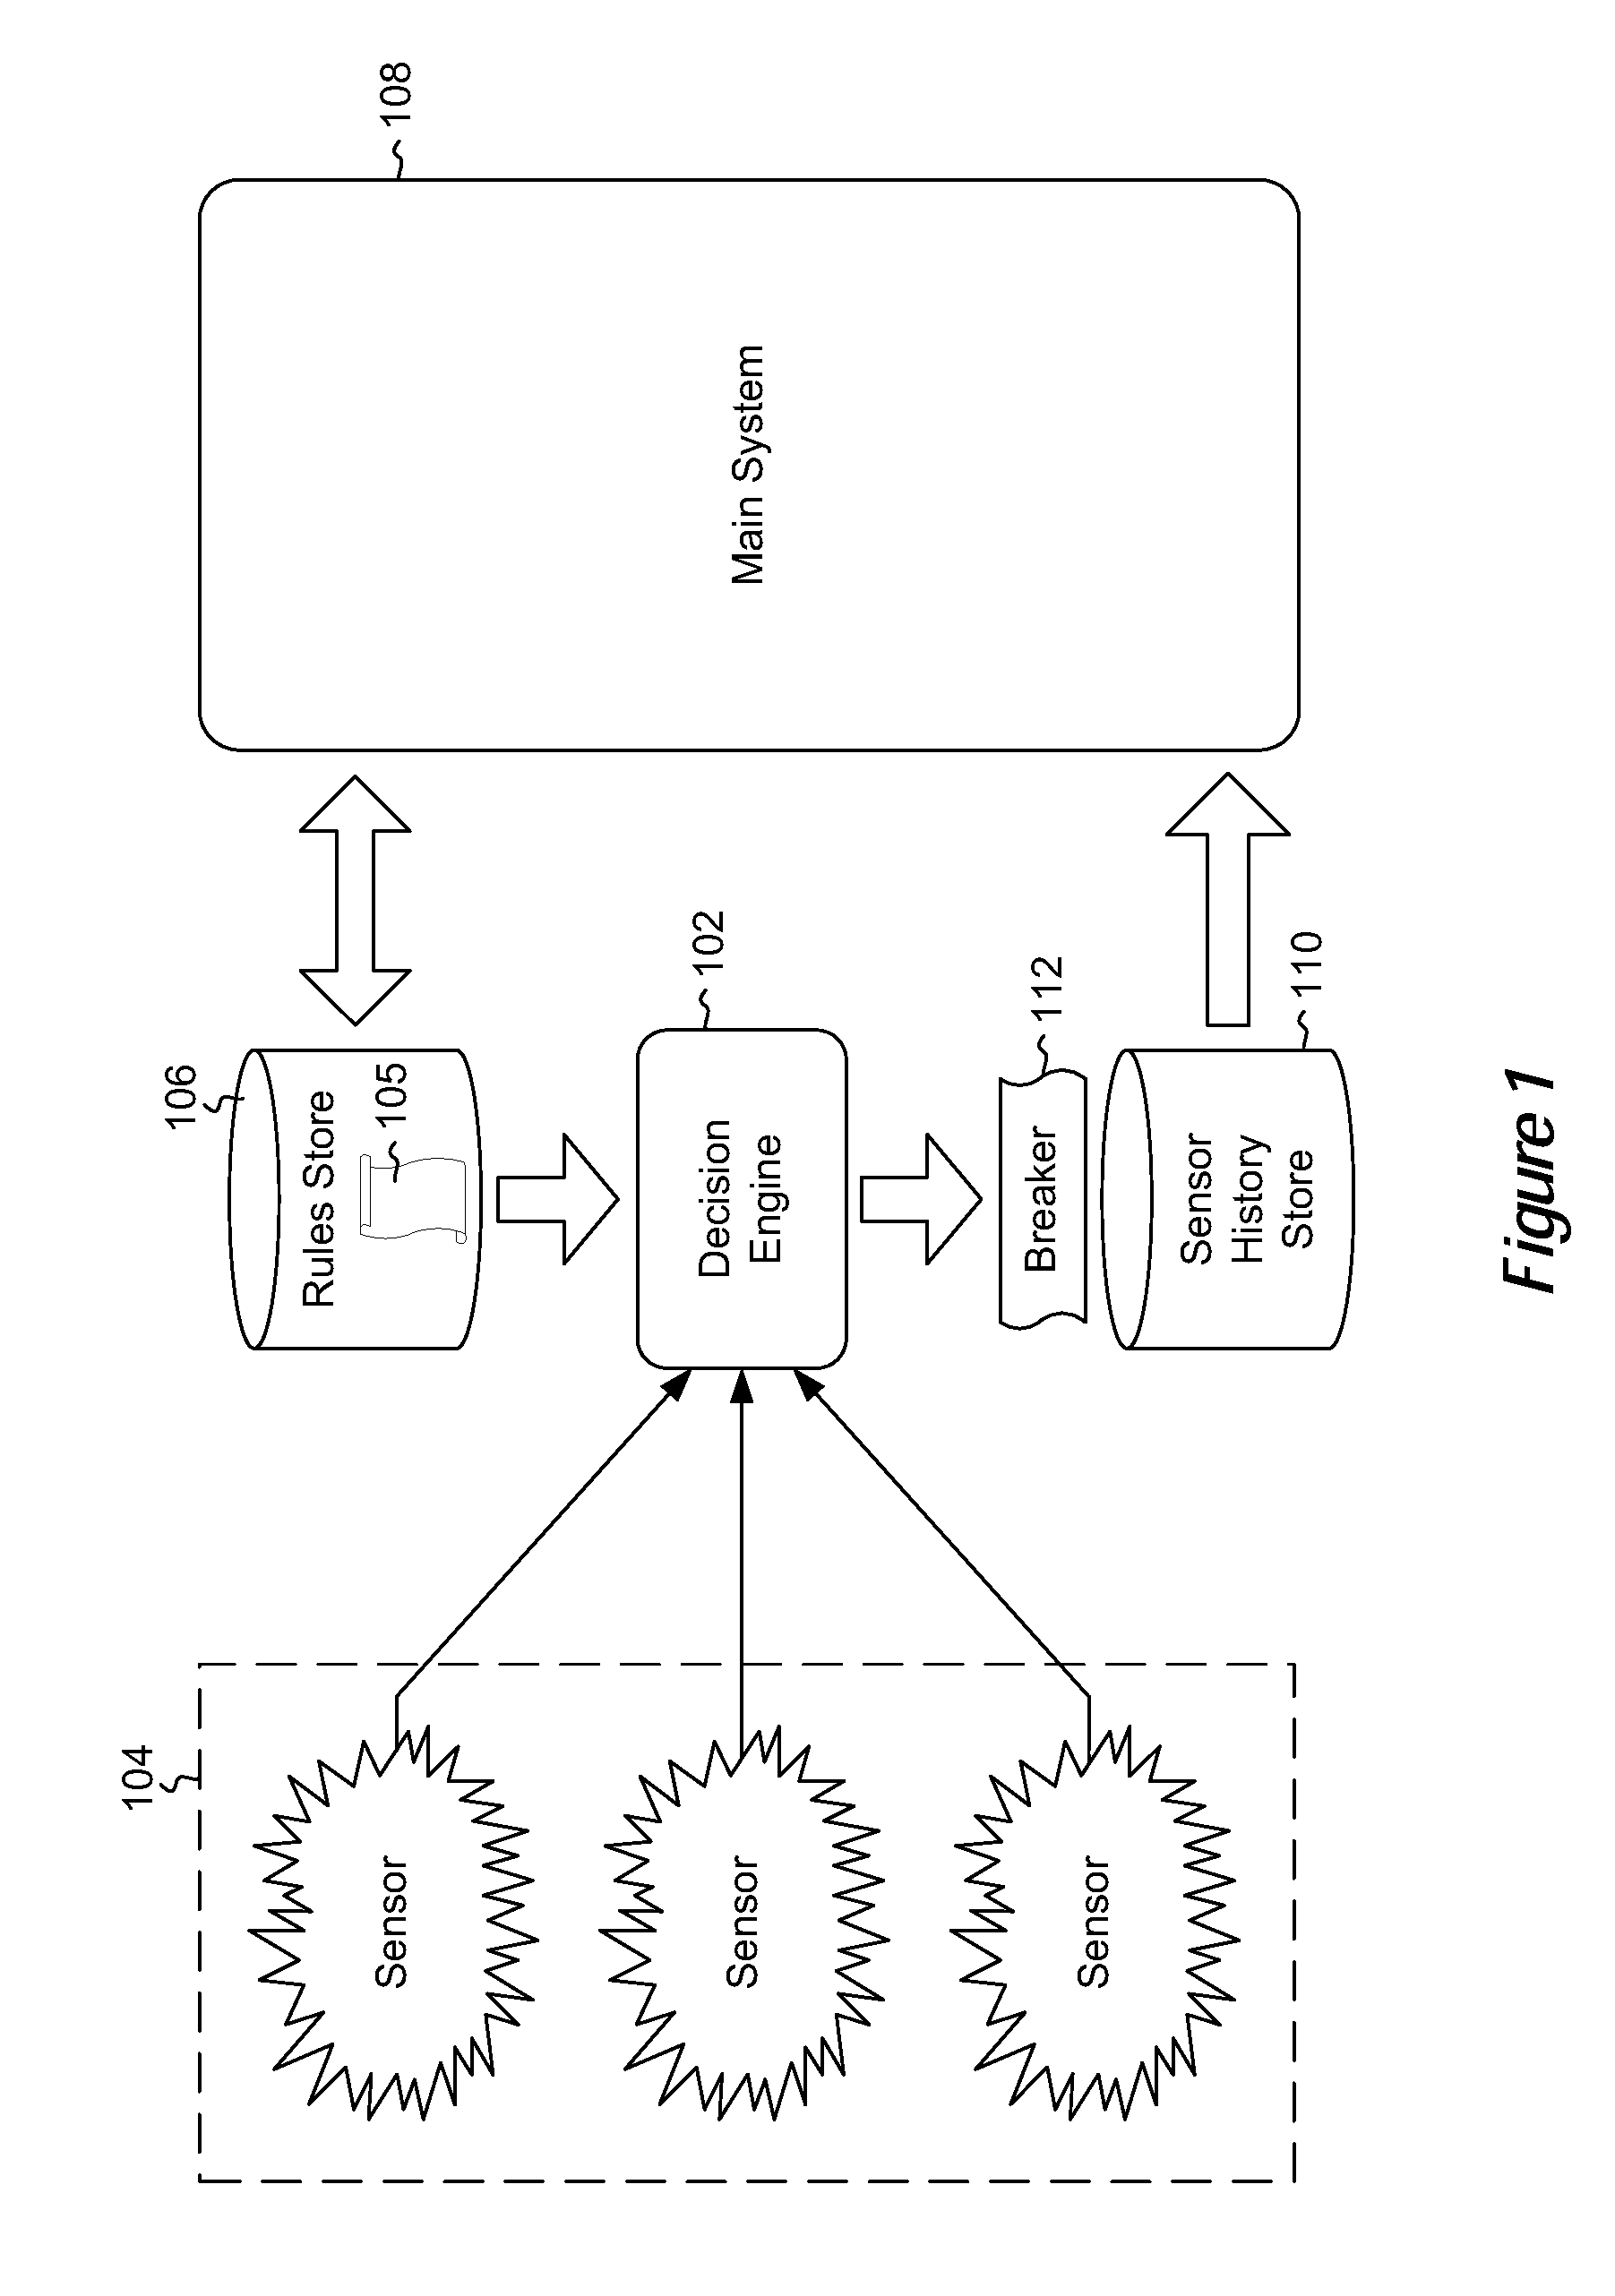 Adaptive sensing for early booting of devices